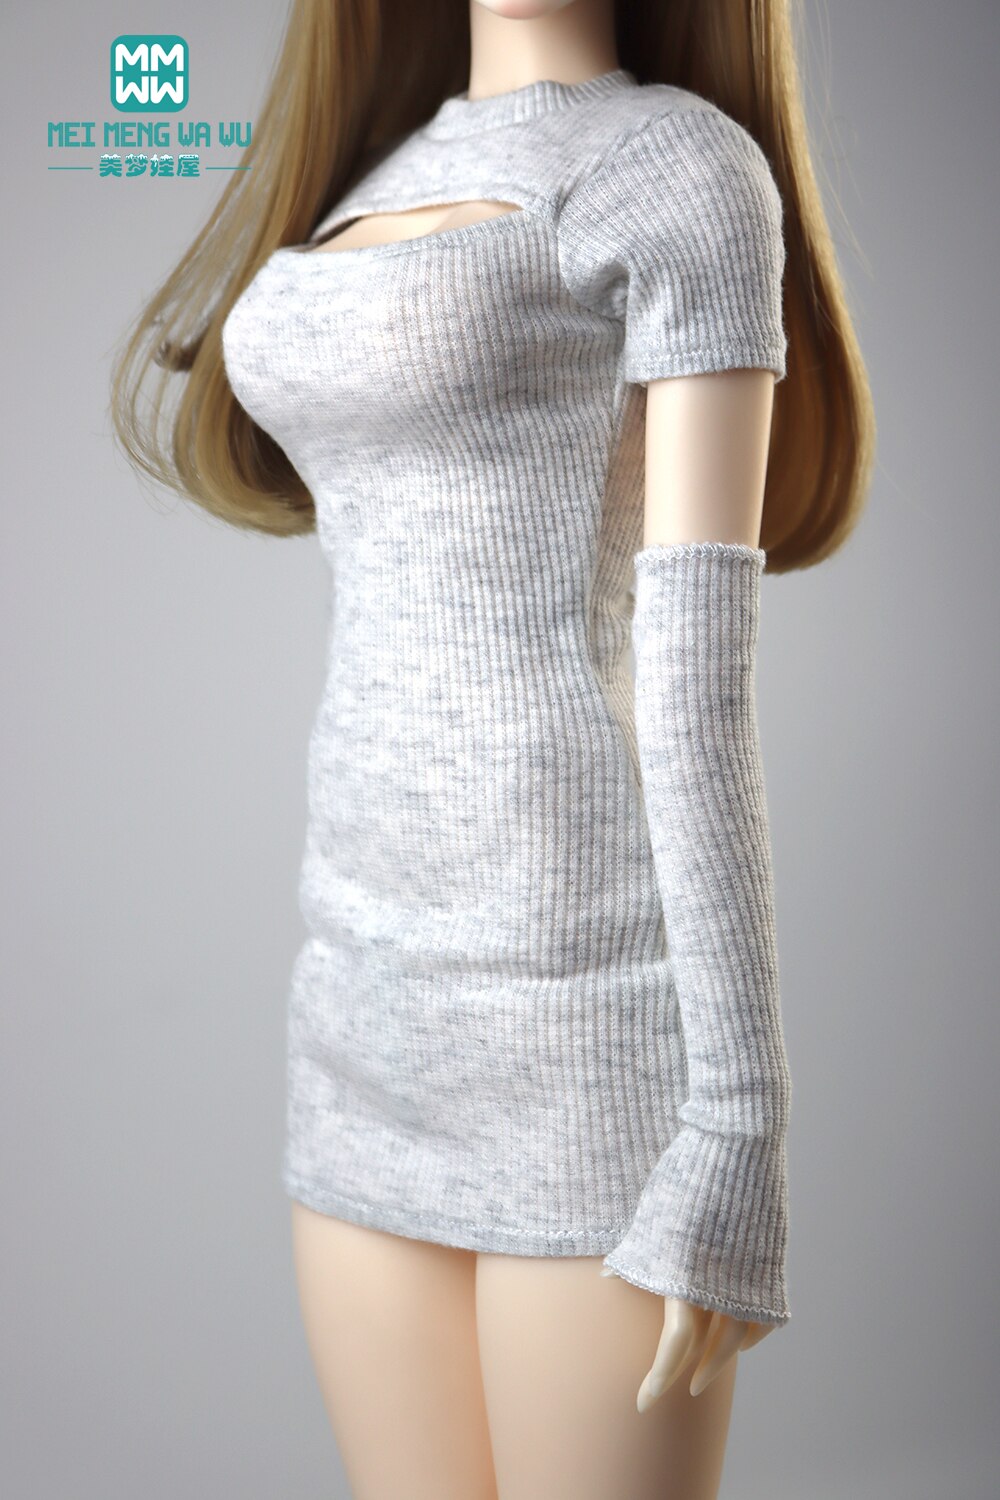 58-60cm 1/3 SD DDL big bust BJD clothes Toy spherical joint doll accessories  Fashion low cut Long T-shirt Dress